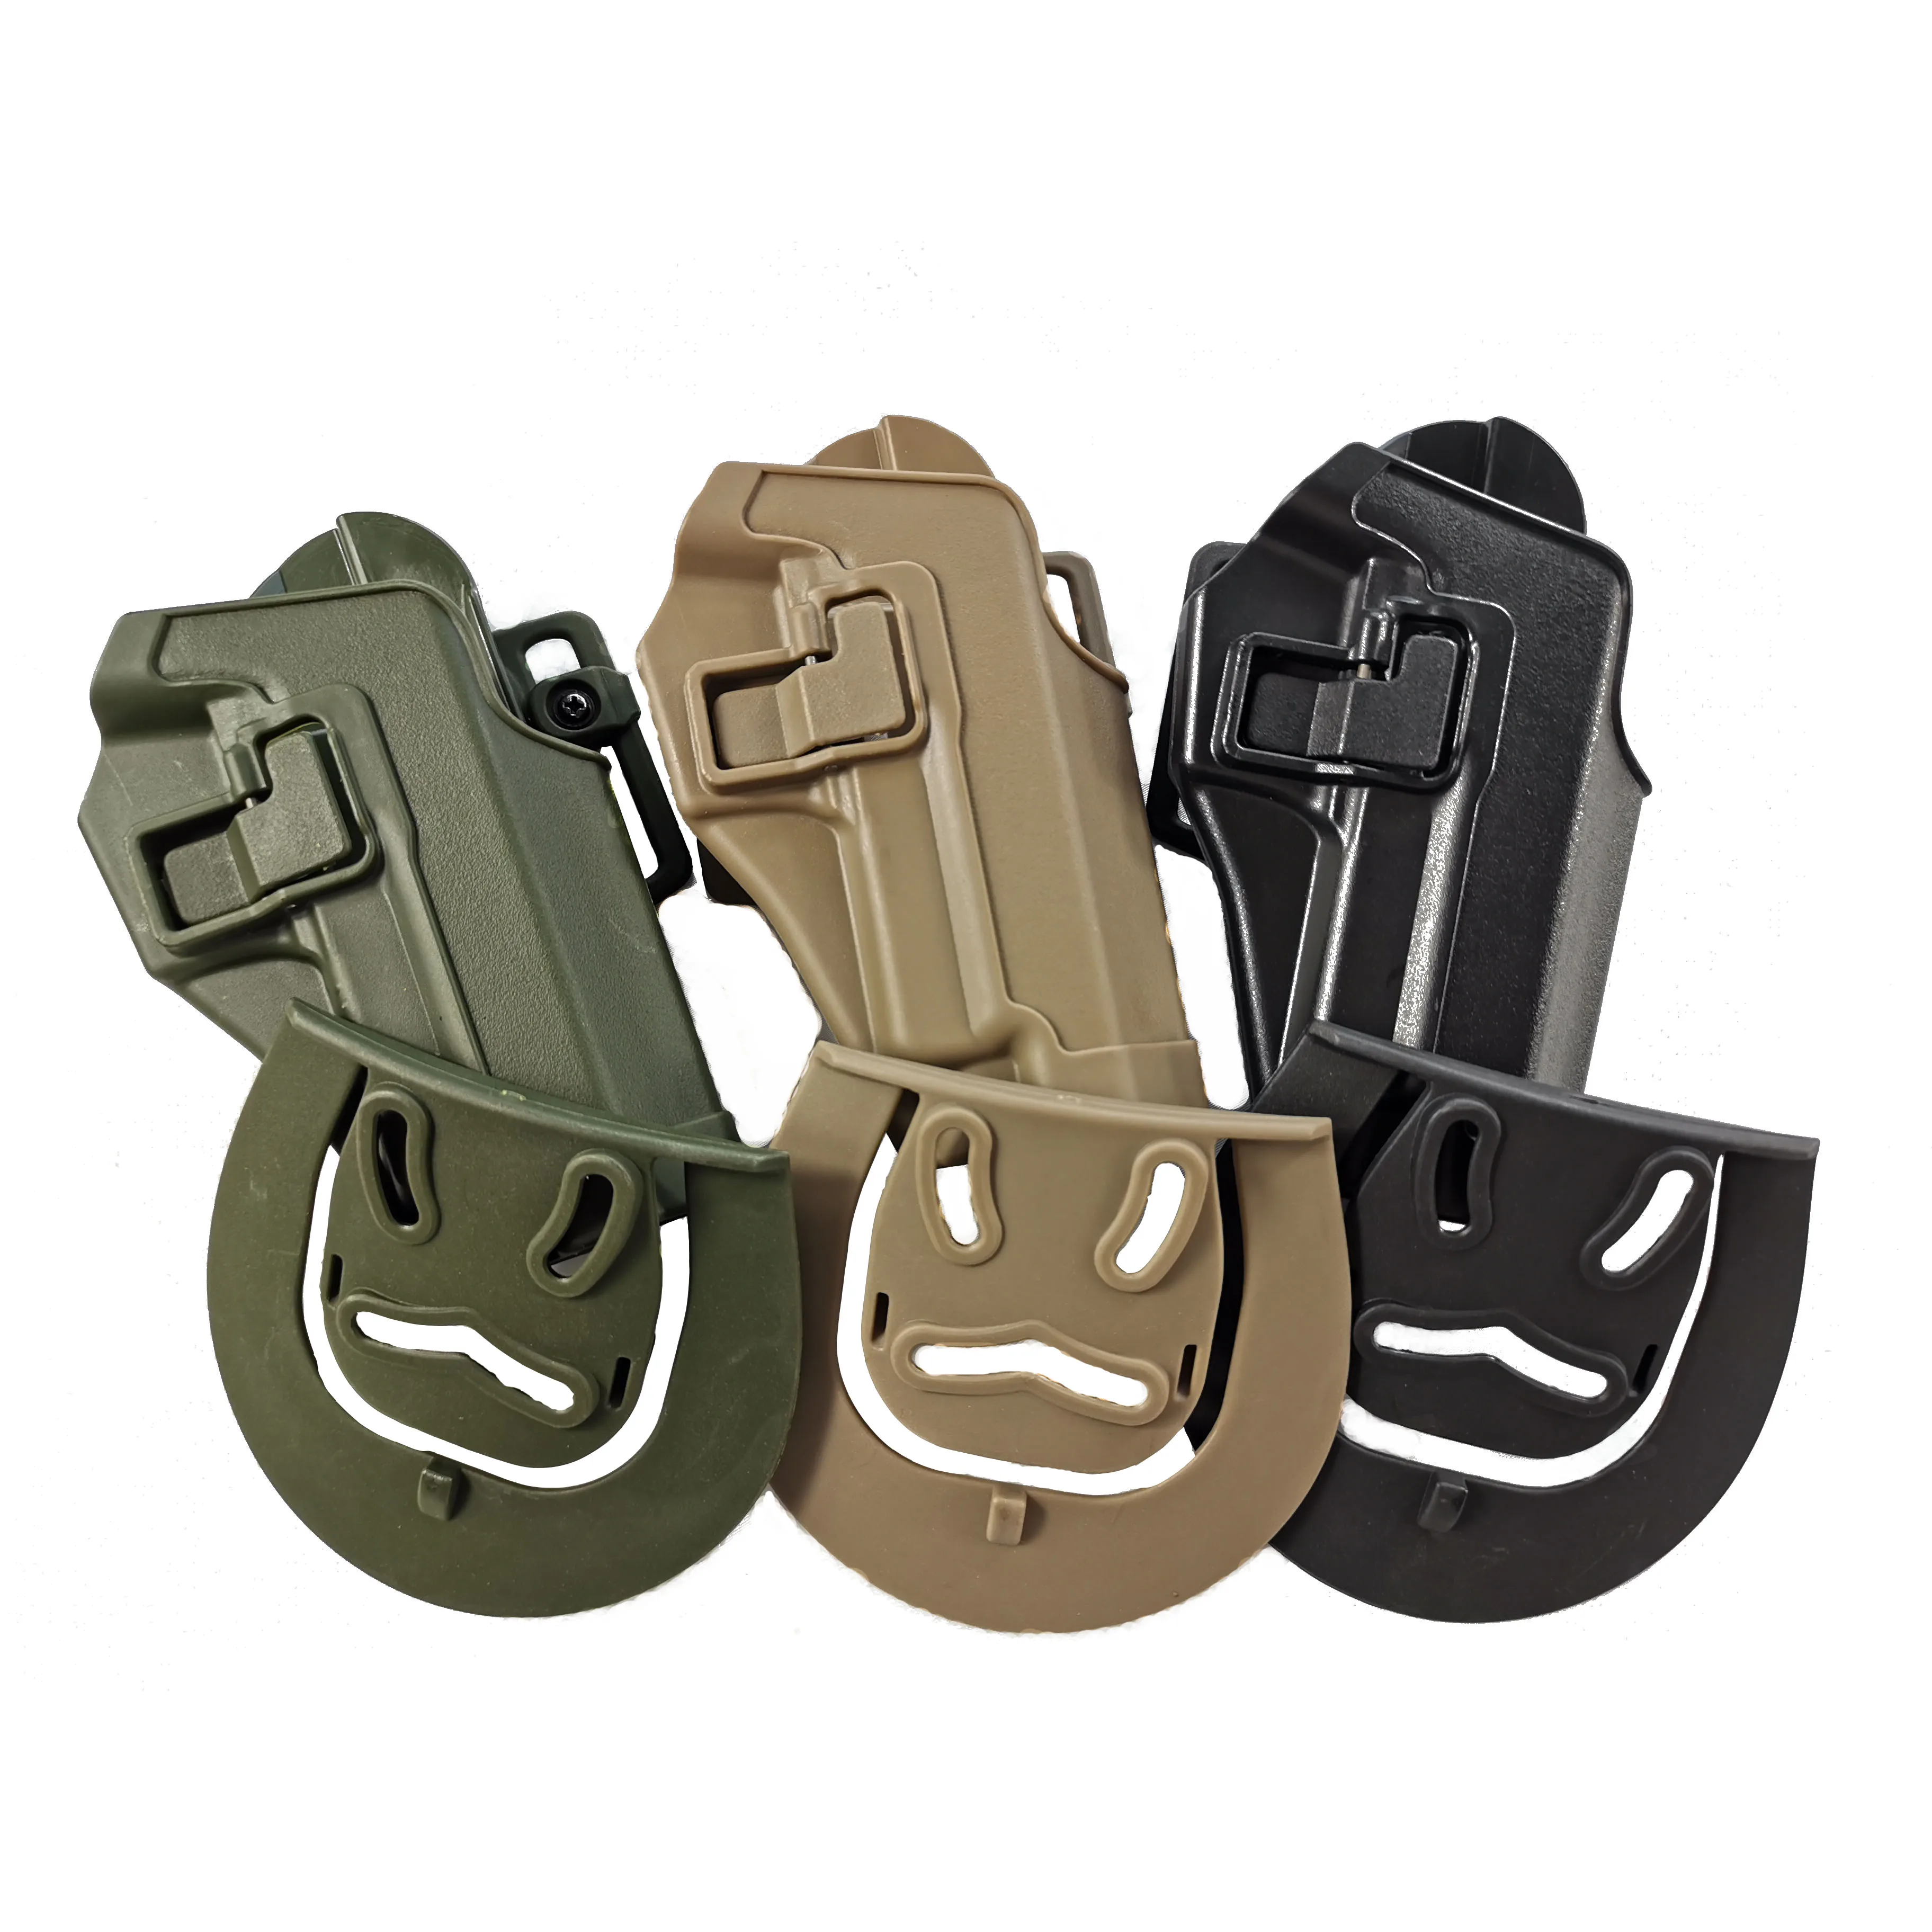 Tactical Serpa Concealment Right-Hand Holster For SIG SAUER P226 P228 P229 Tan